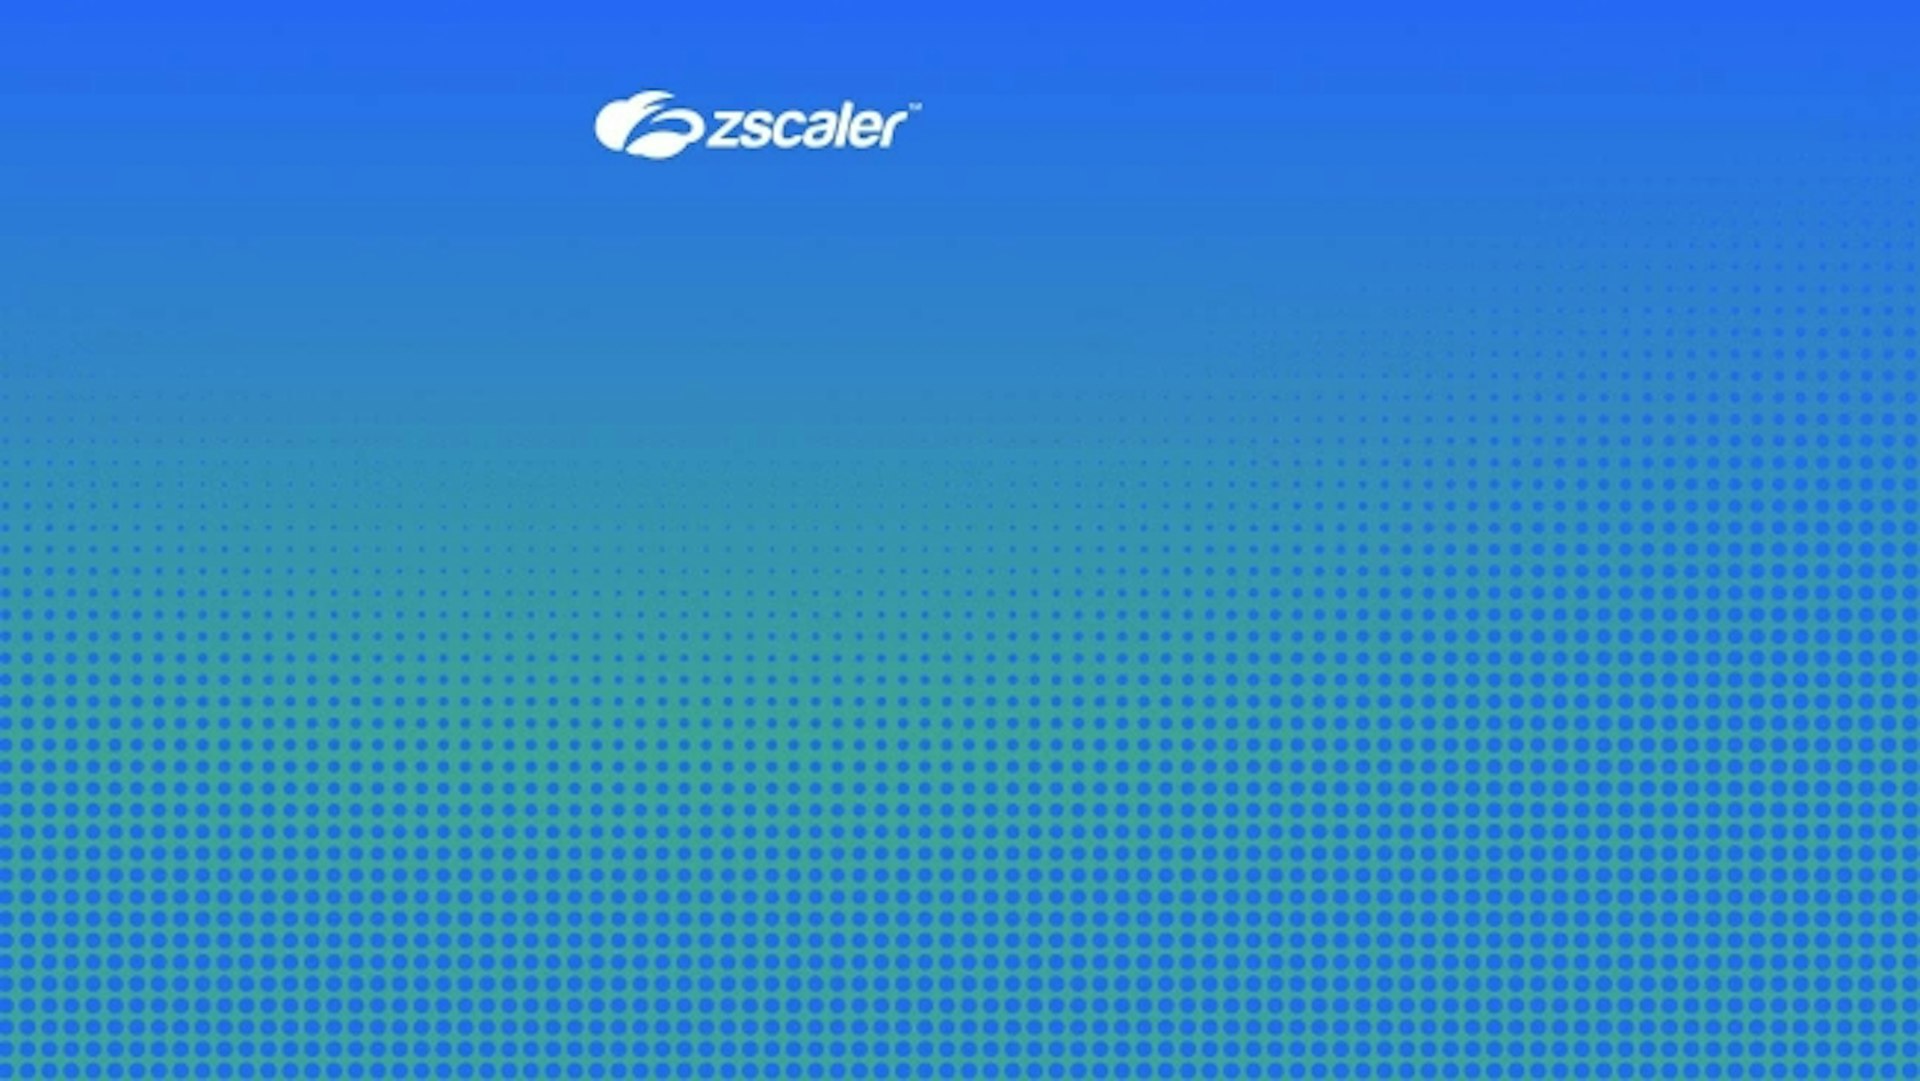 ZscalerとCrowdStrikeの展開ガイド